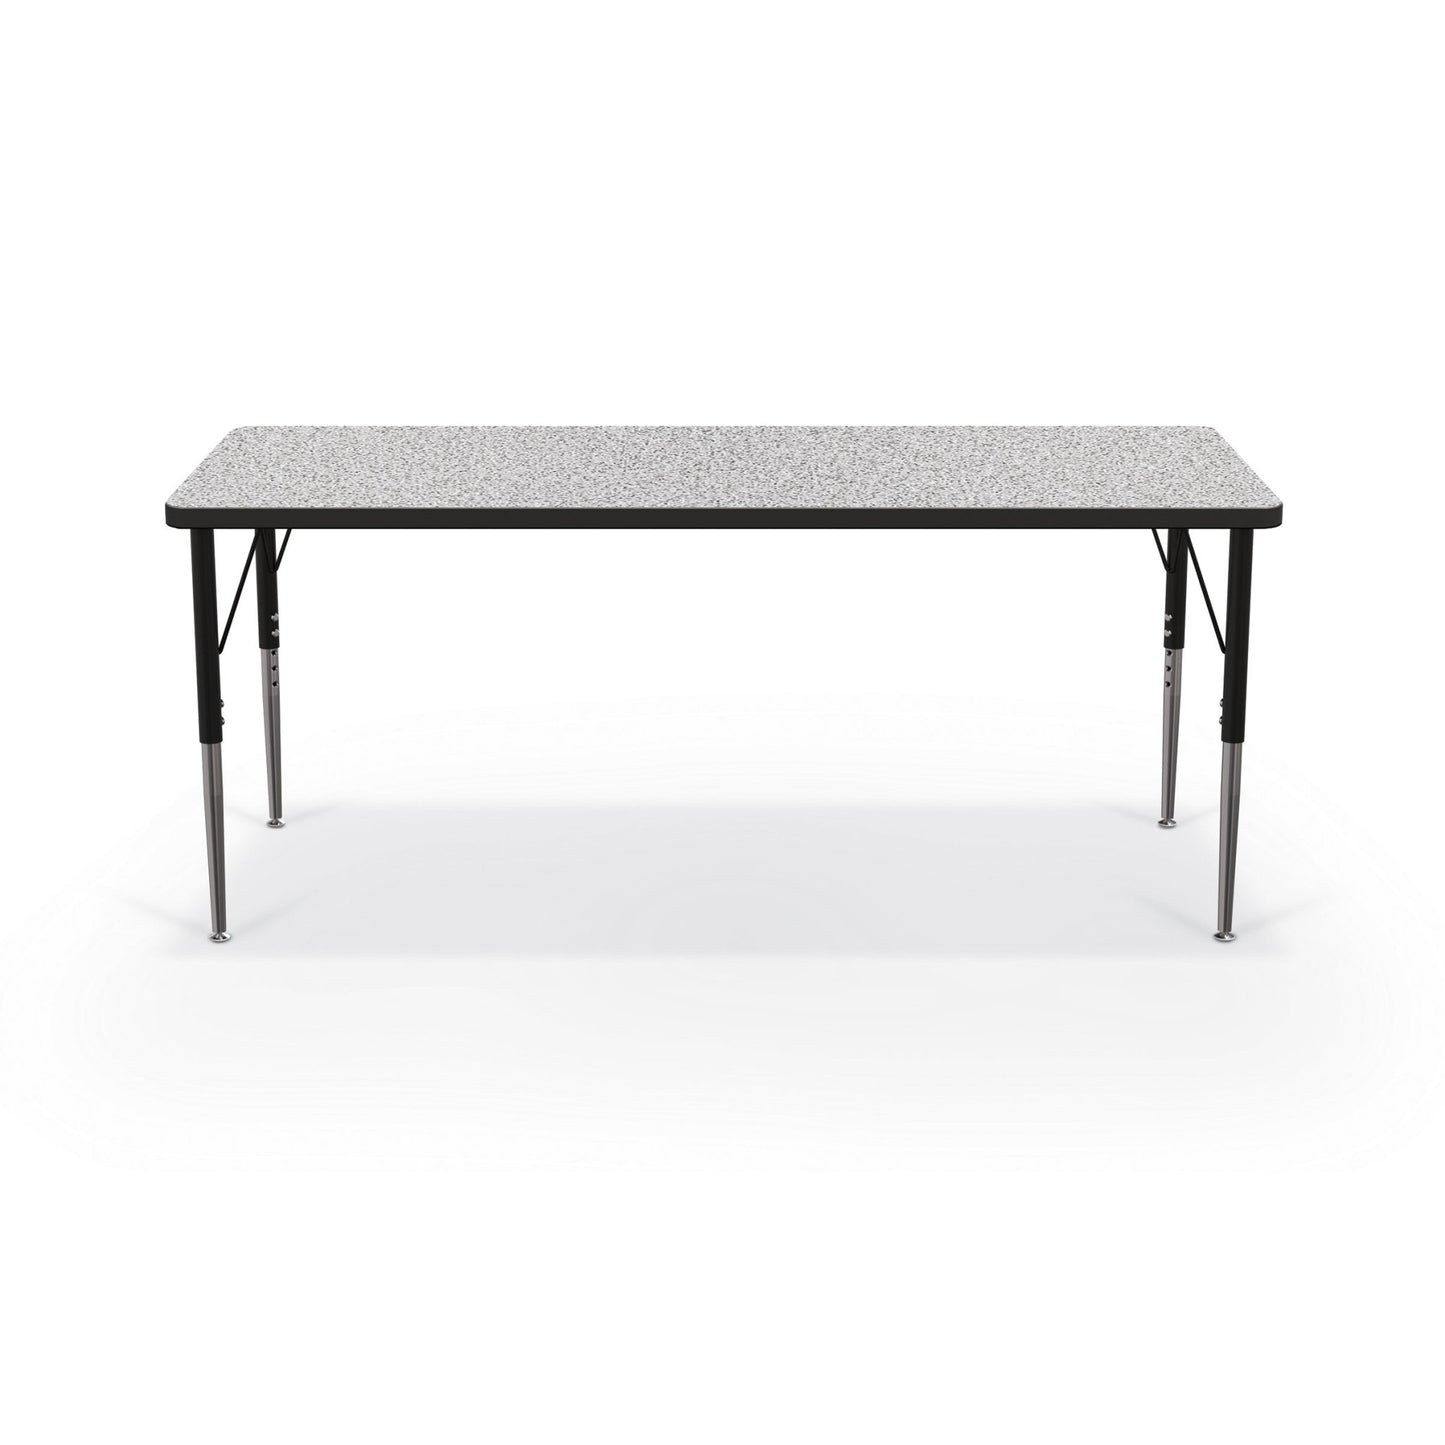 Mooreco Activity Table - 24"D x 60"W - Rectangle - Black Edgeband (Mooreco 90527-C) - SchoolOutlet